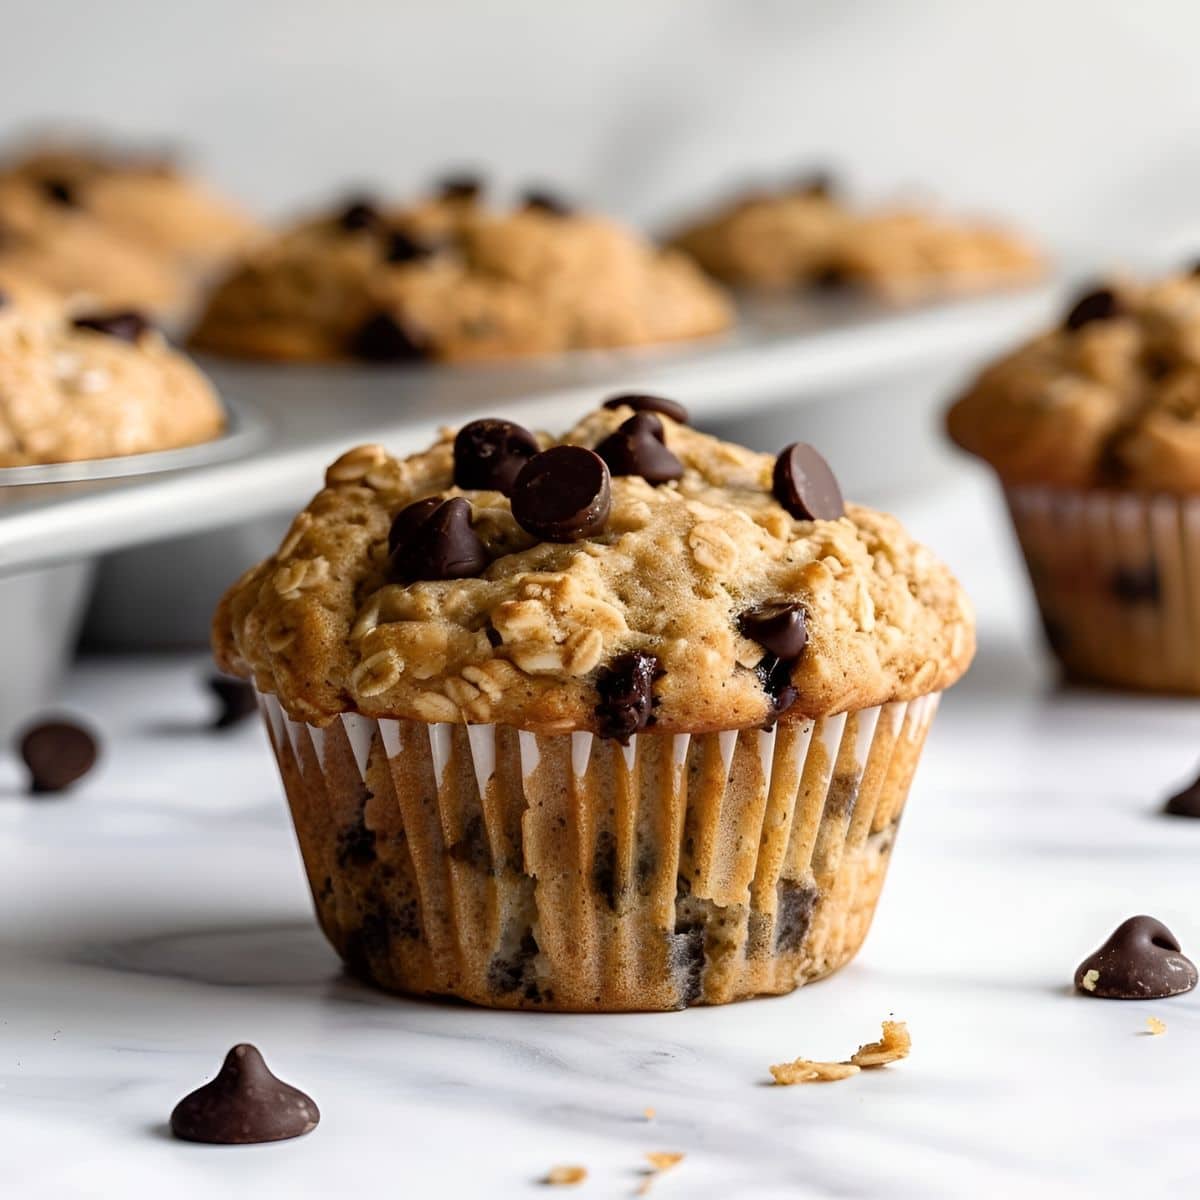 Close up of Chocolate Chip Oatmeal Muffin on a White Marble Table